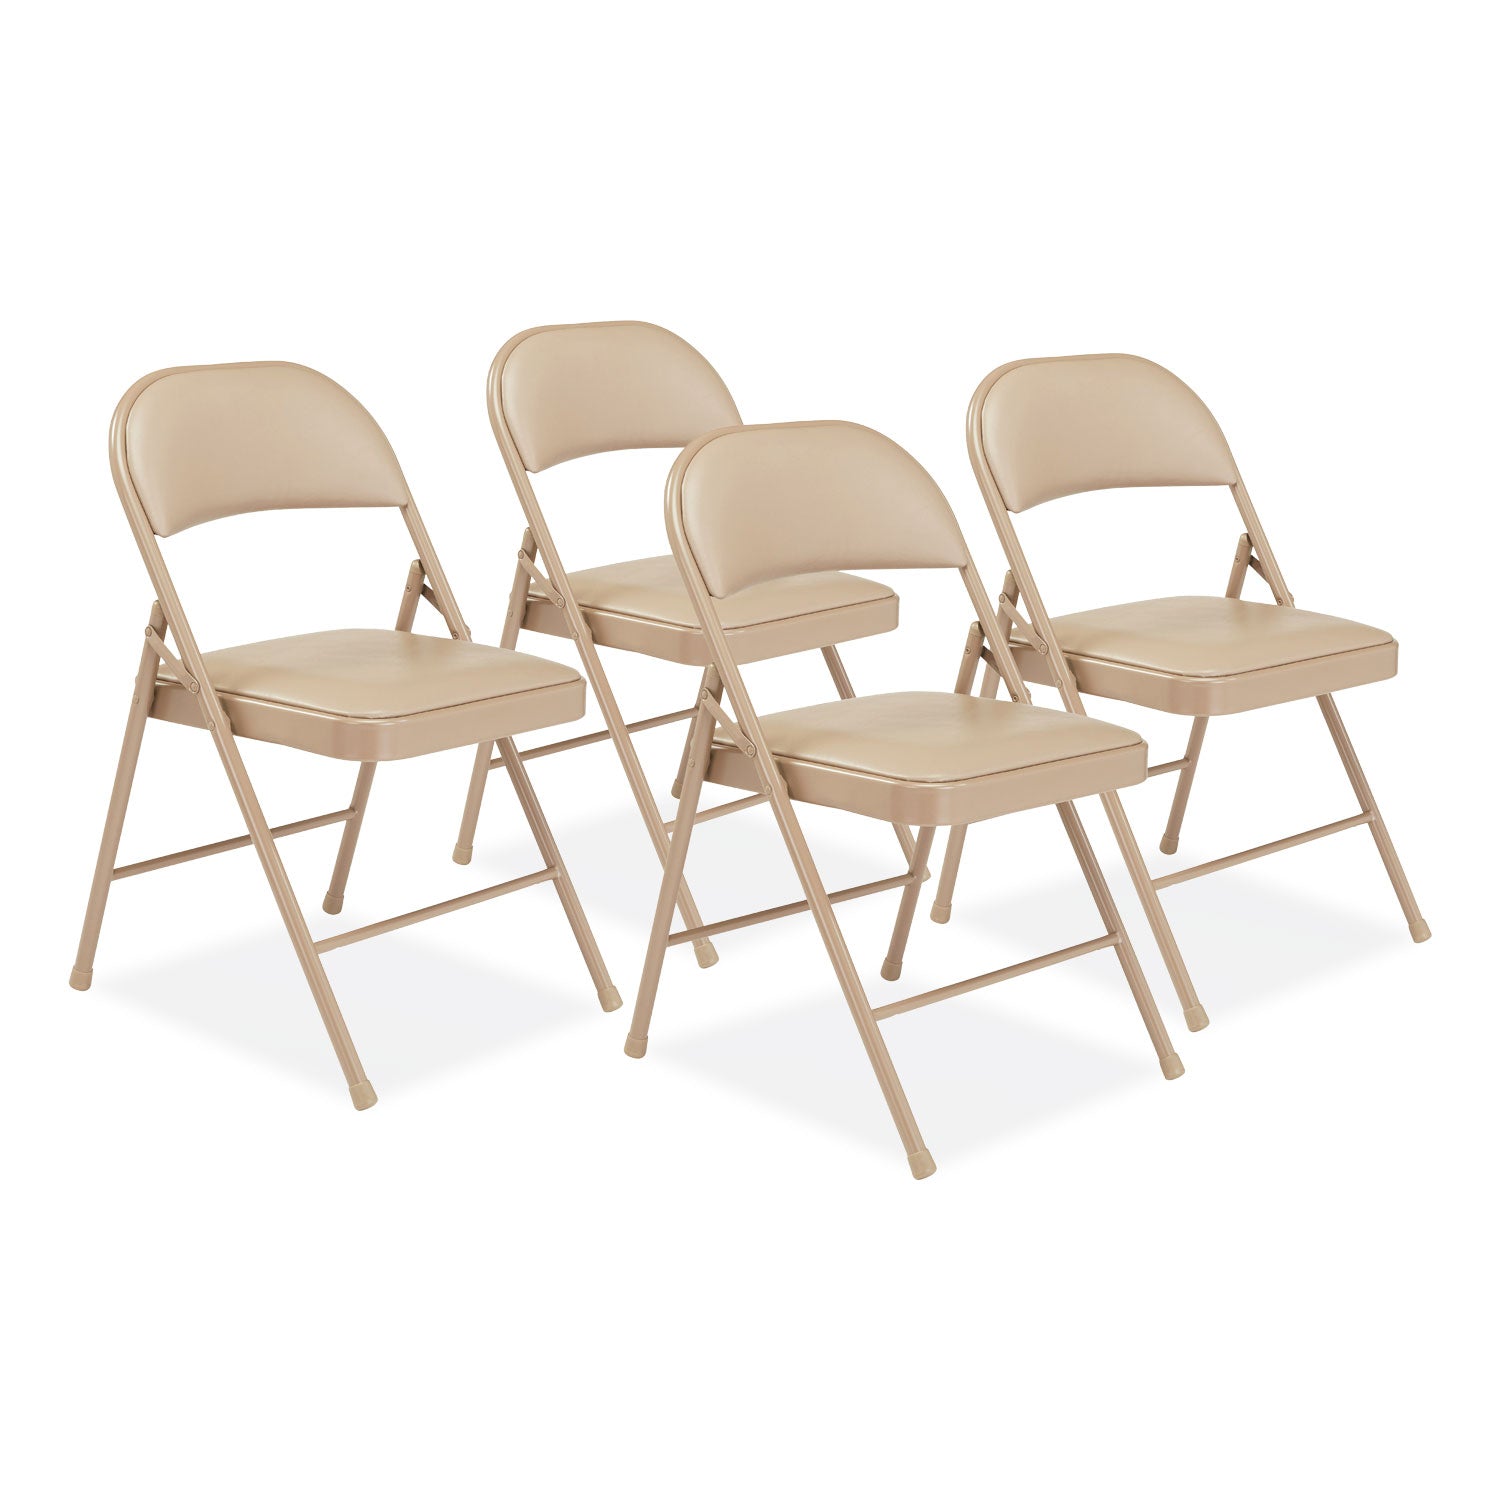 950-series-vinyl-padded-steel-folding-chair-supports-up-to-250-lb-1775-seat-height-beige-4-cartonships-in-1-3-bus-days_nps951 - 1